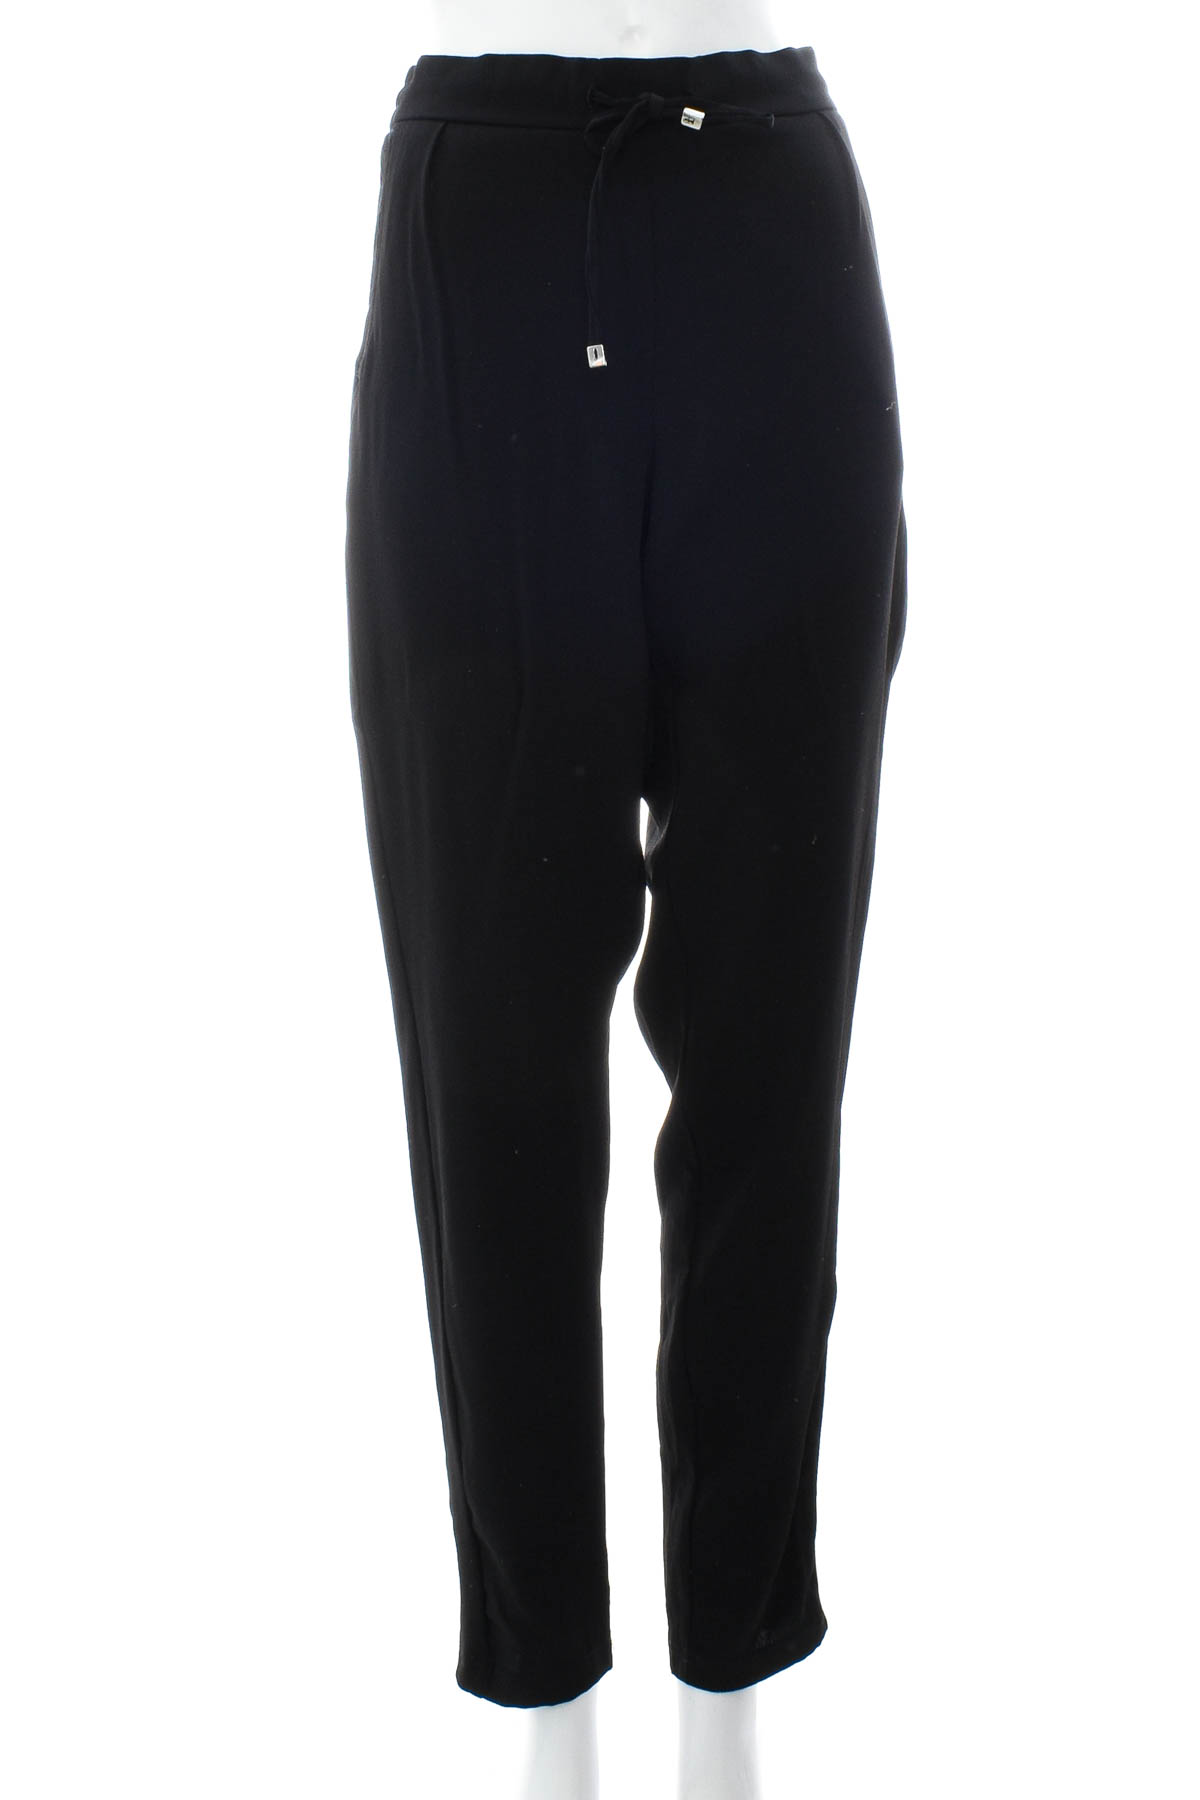 Women's trousers - Looxent - 0